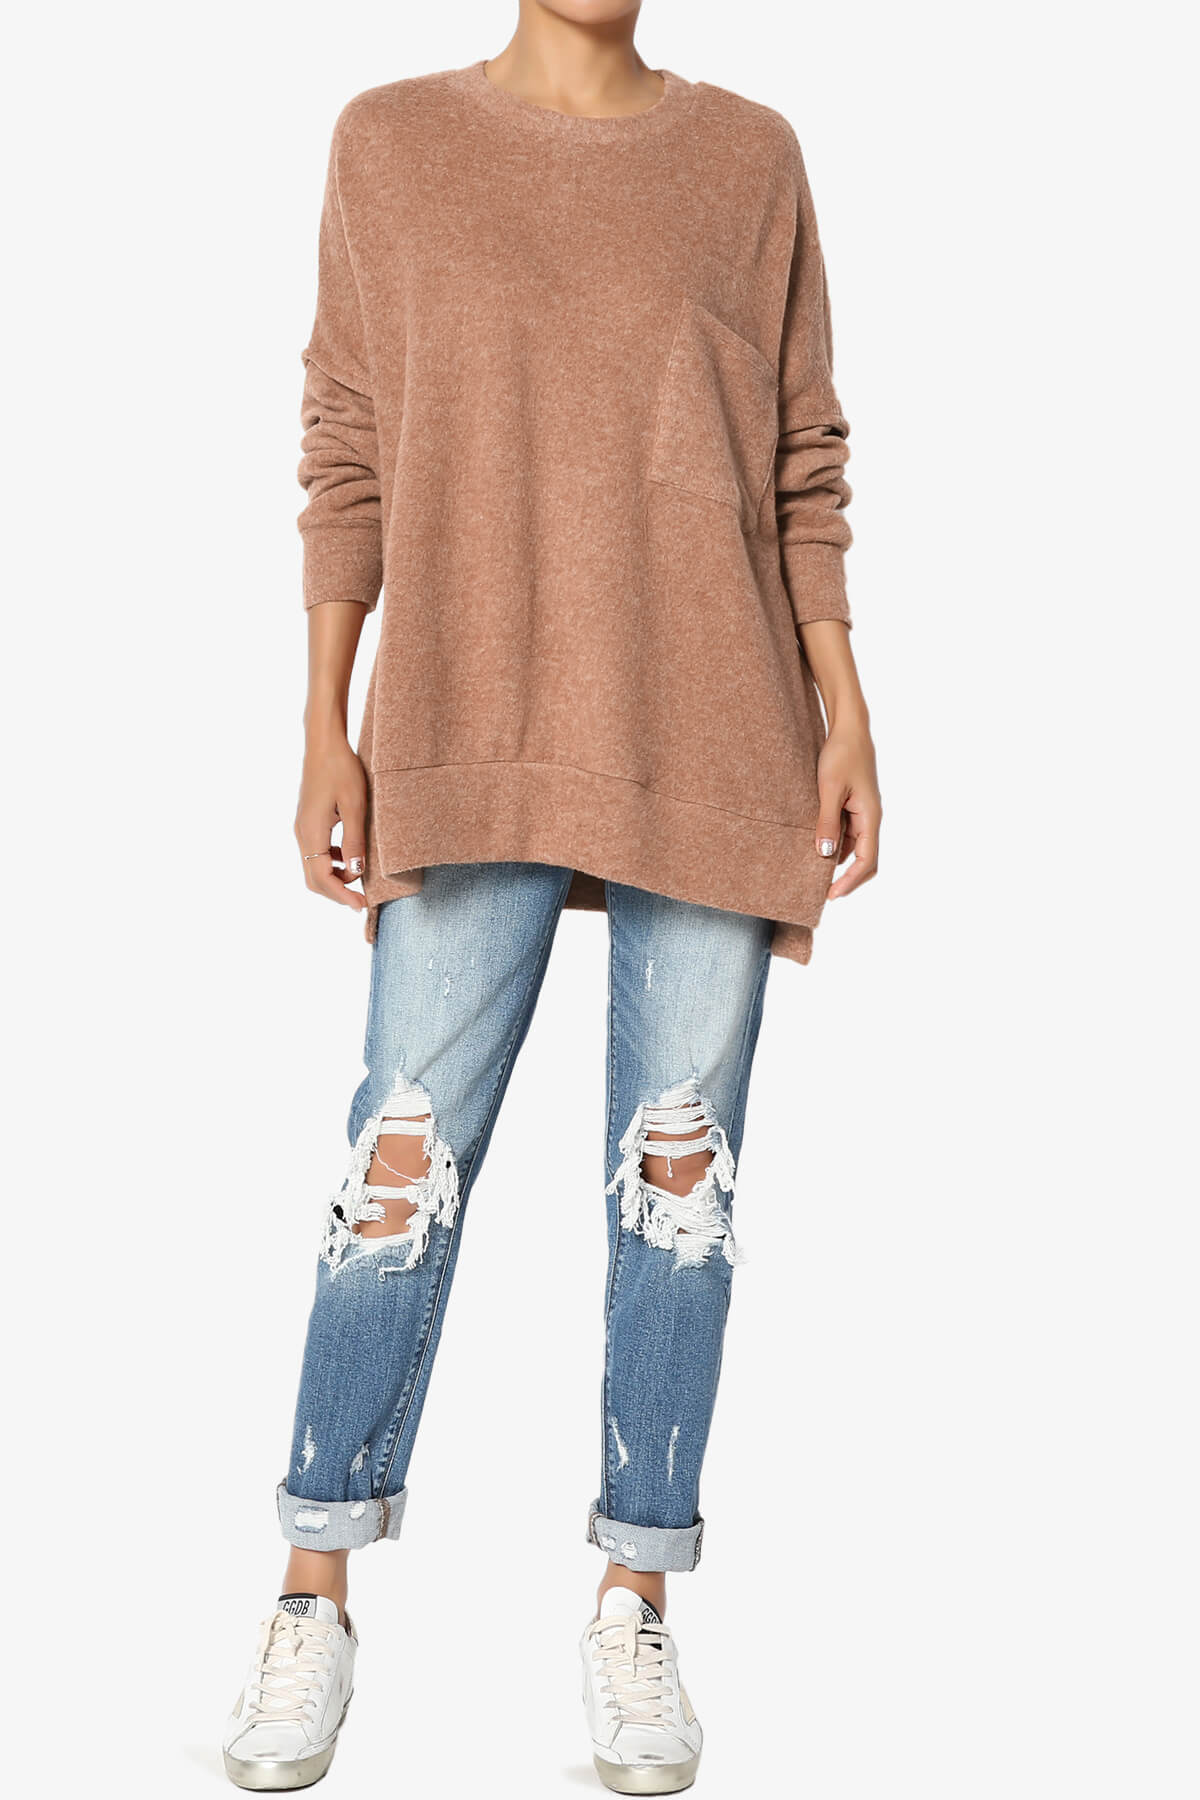 Load image into Gallery viewer, Breccan Blushed Knit Oversized Sweater DEEP CAMEL_6
